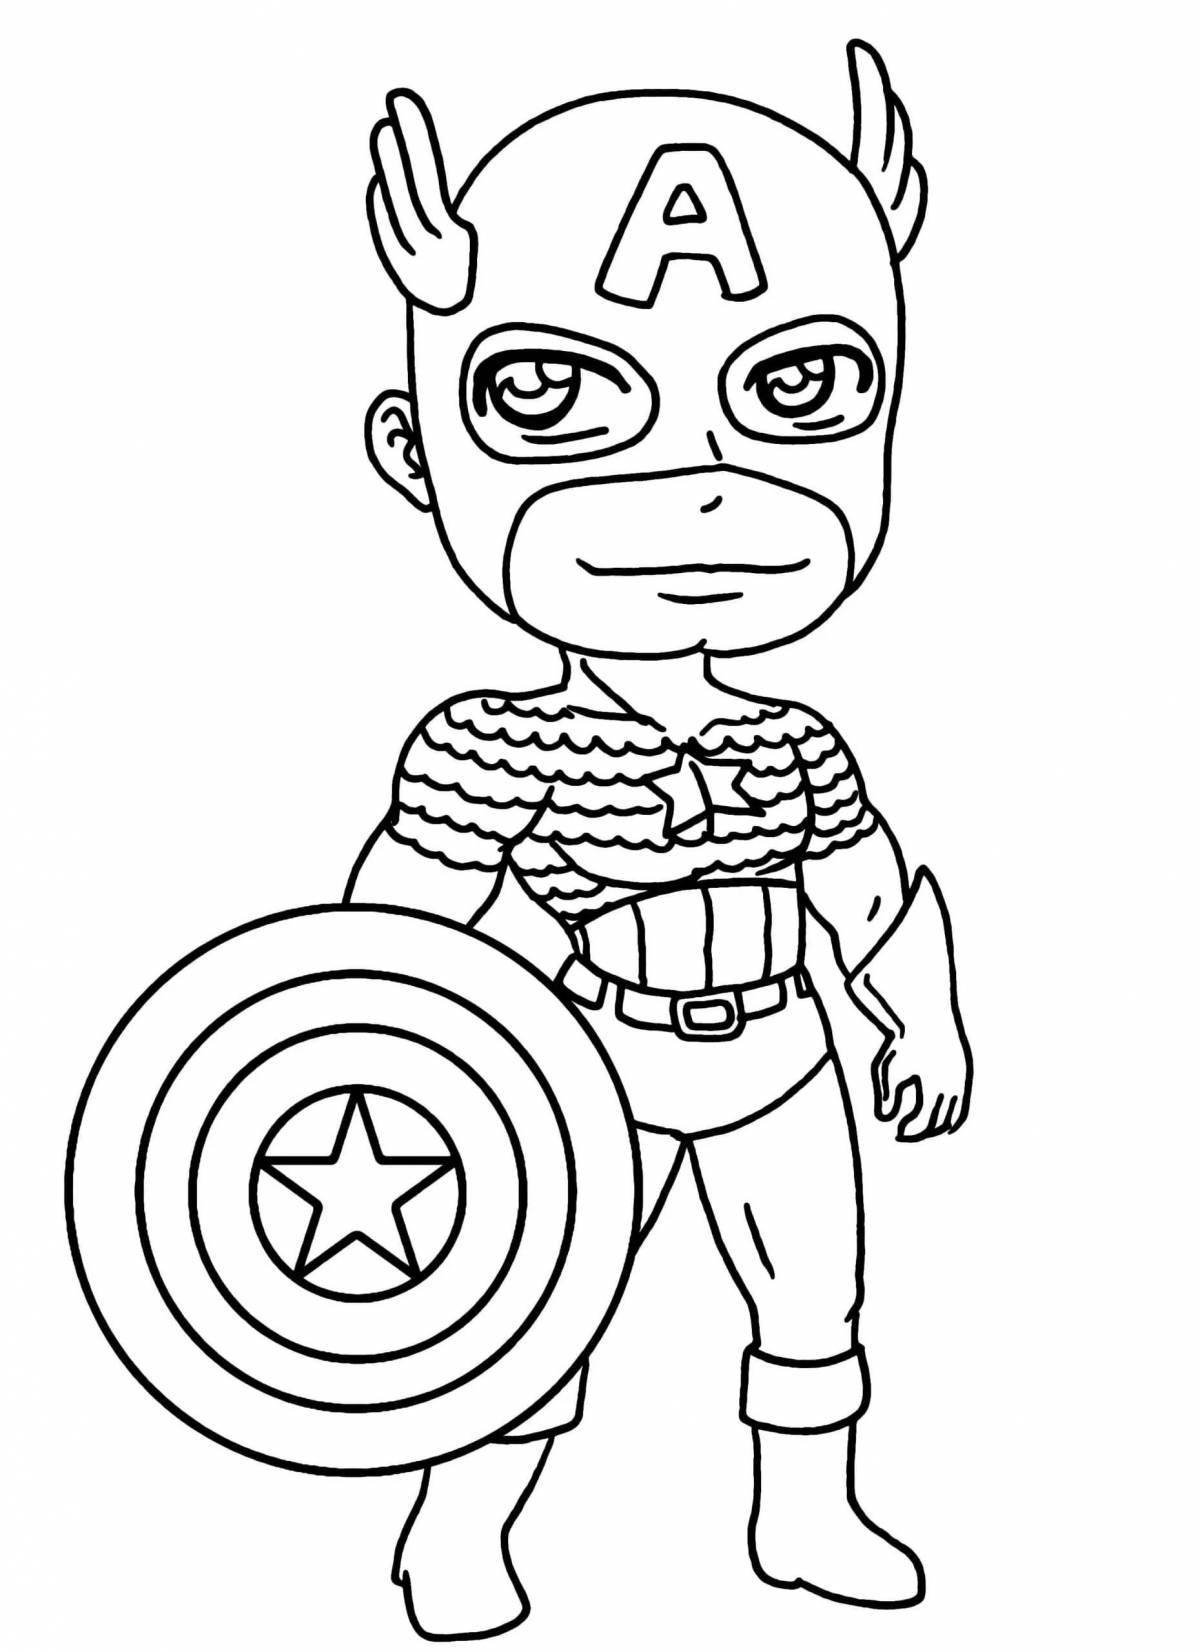 Adorable coloring book avengers for boys